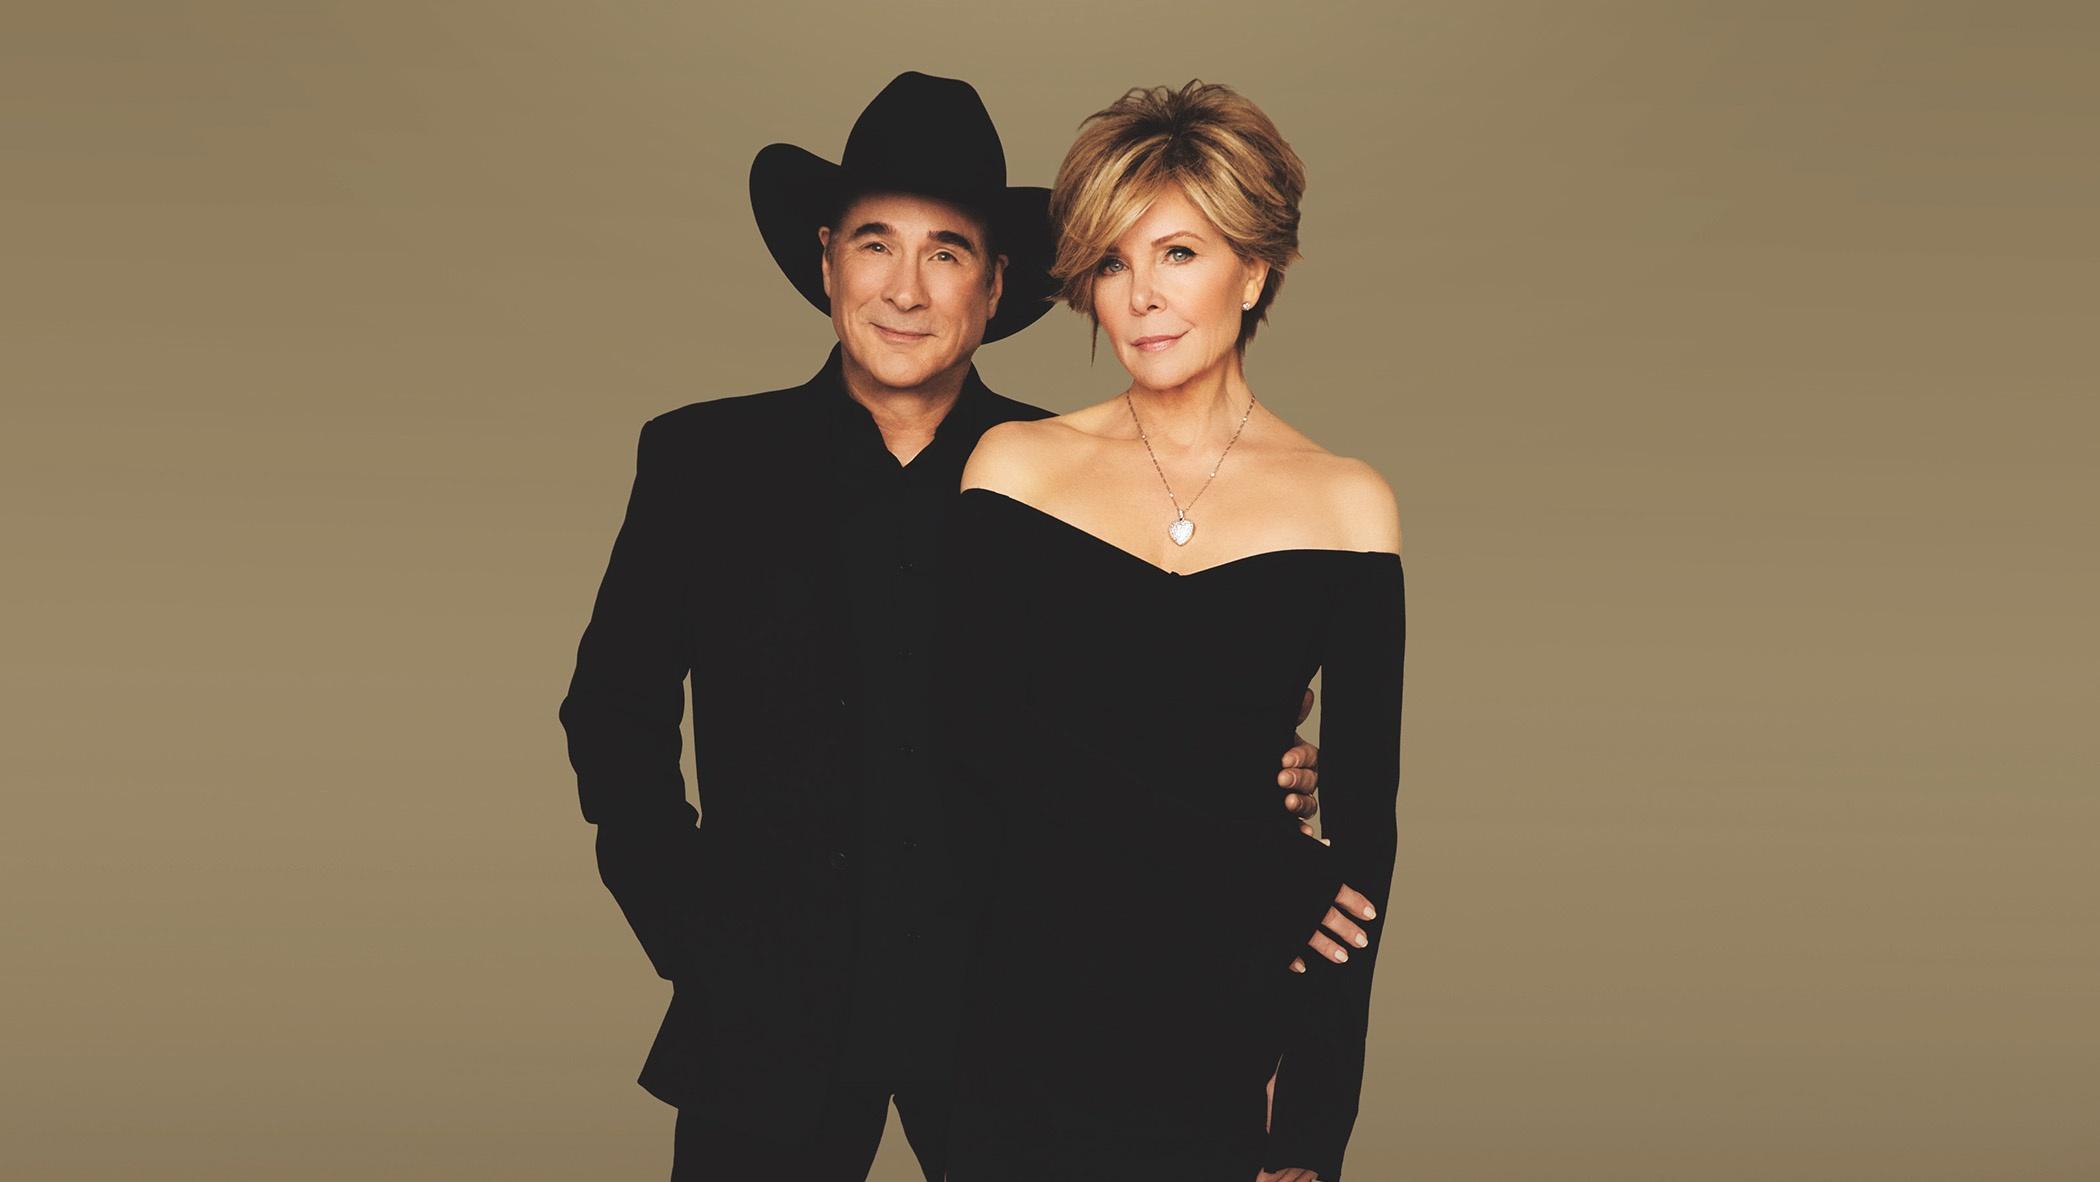 Clint Black: Mostly Hits & The Mrs.